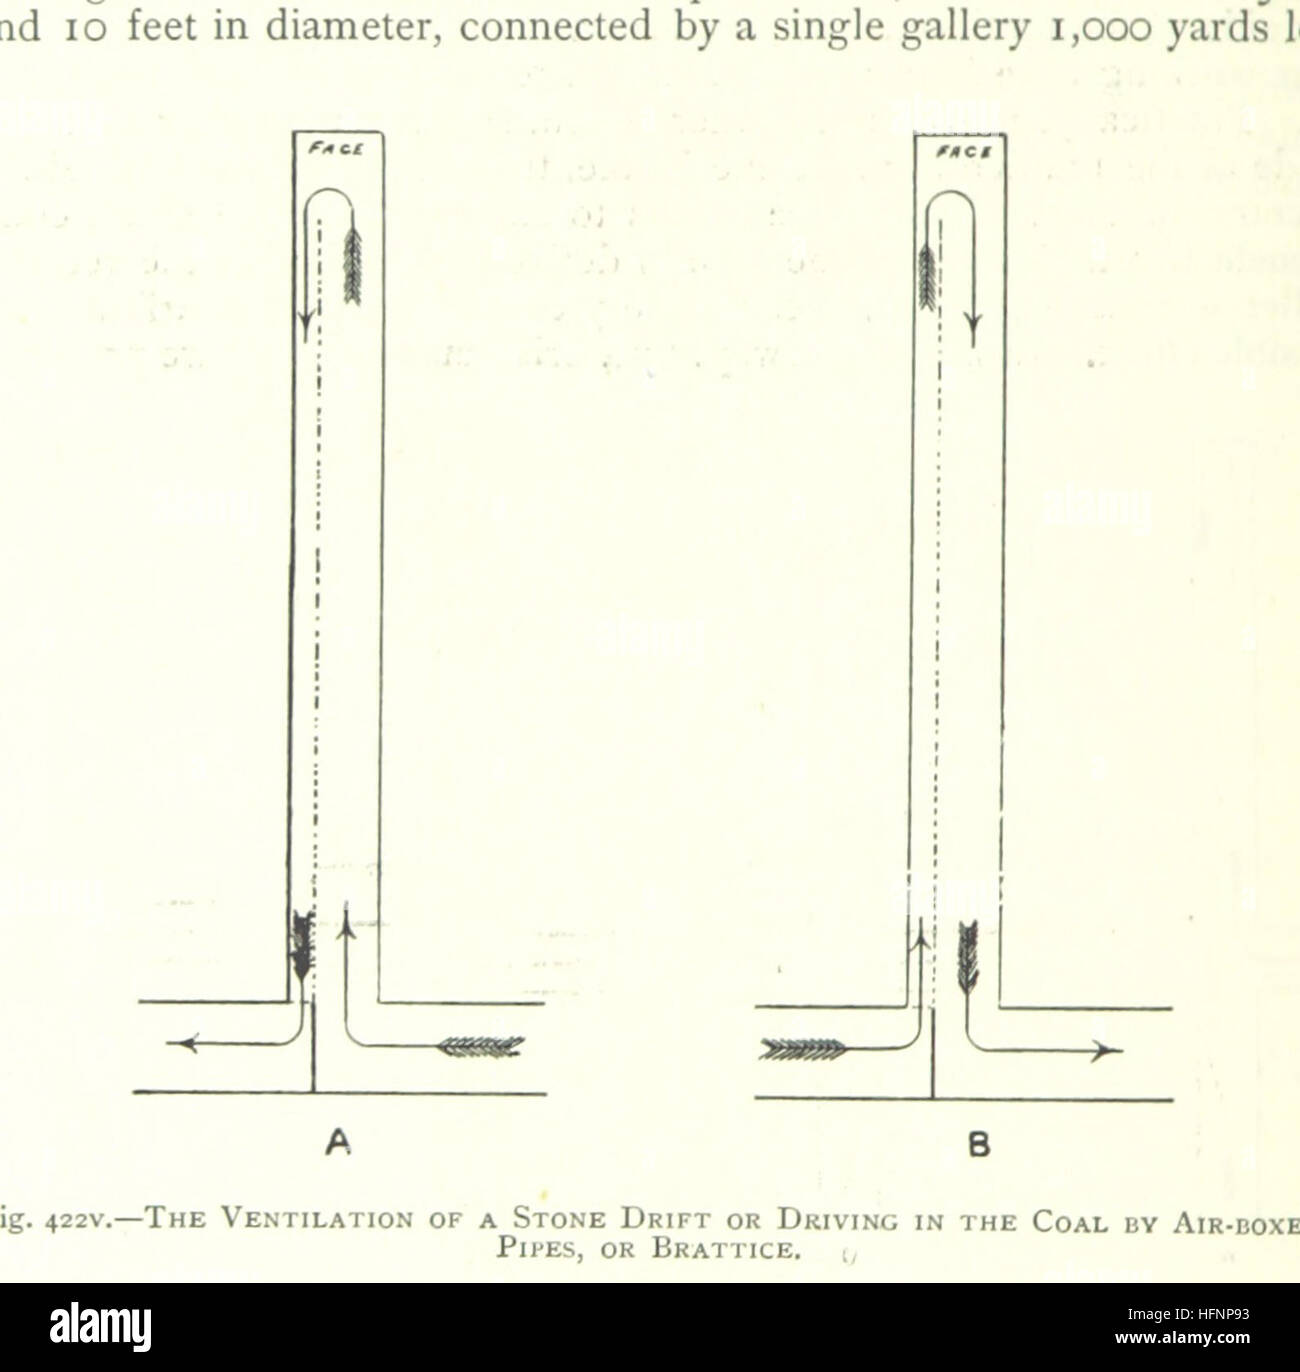 Image taken from page 578 of 'The Colliery Manager's Handbook ... Fourth edition, revised and enlarged' Image taken from page 578 of 'The Colliery Manager's Handbook Stock Photo